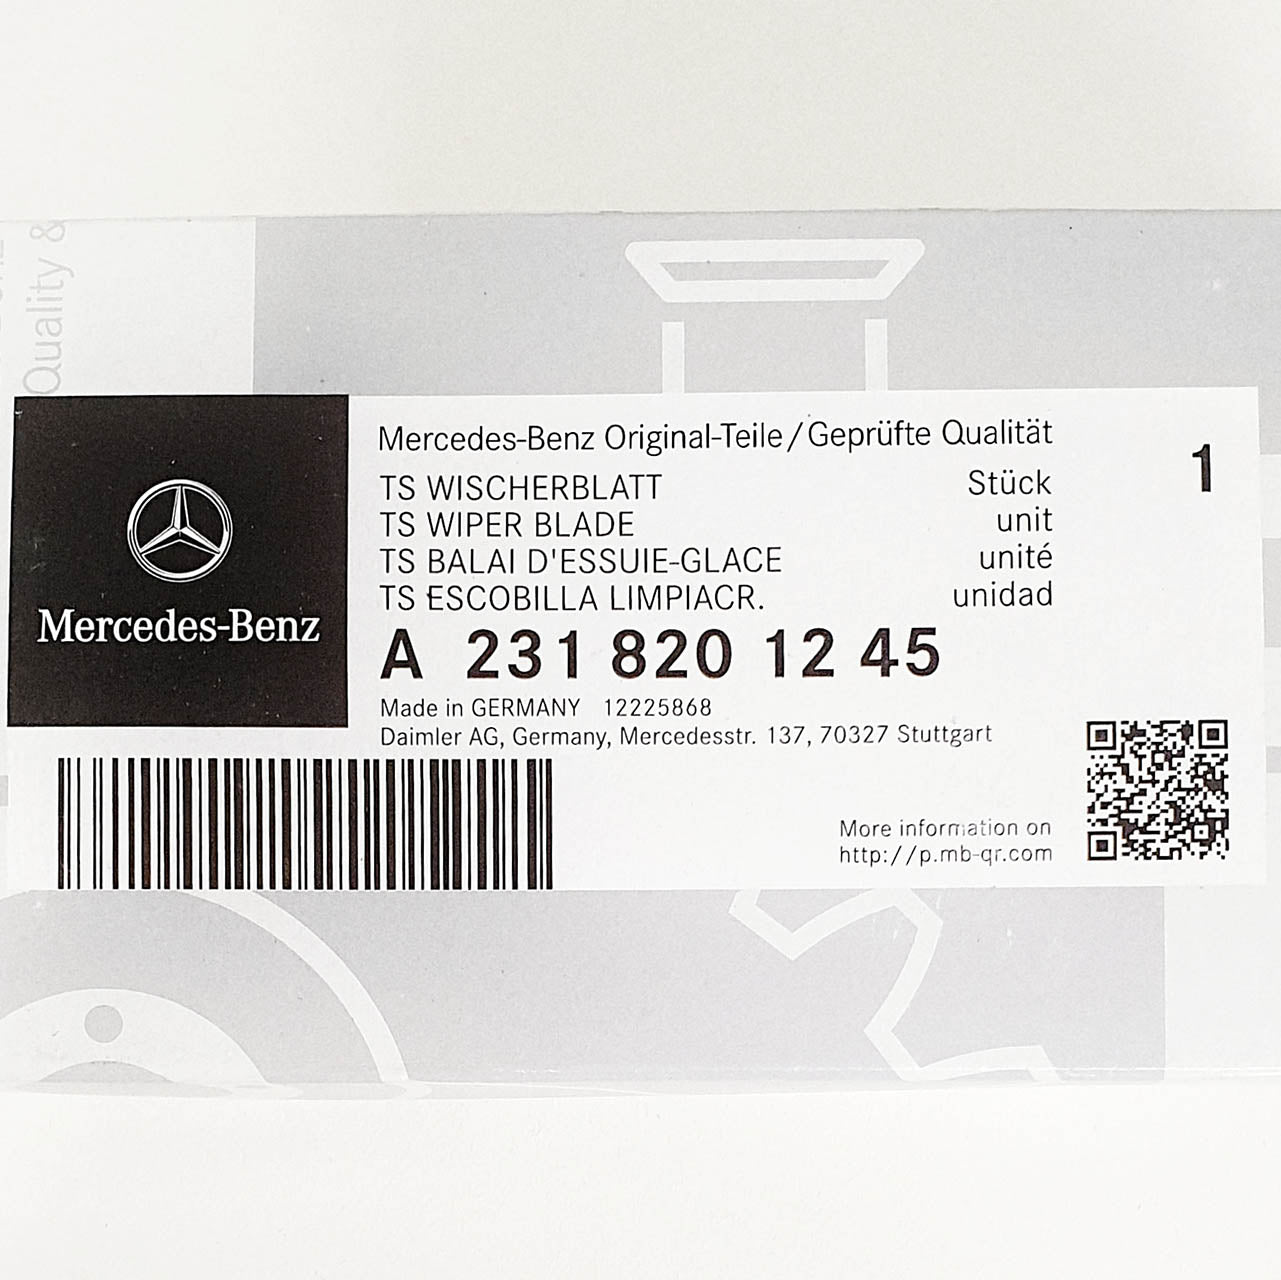 Genuine Mercedes-Benz SL Class Heated Front Wiper Blades for R231 models